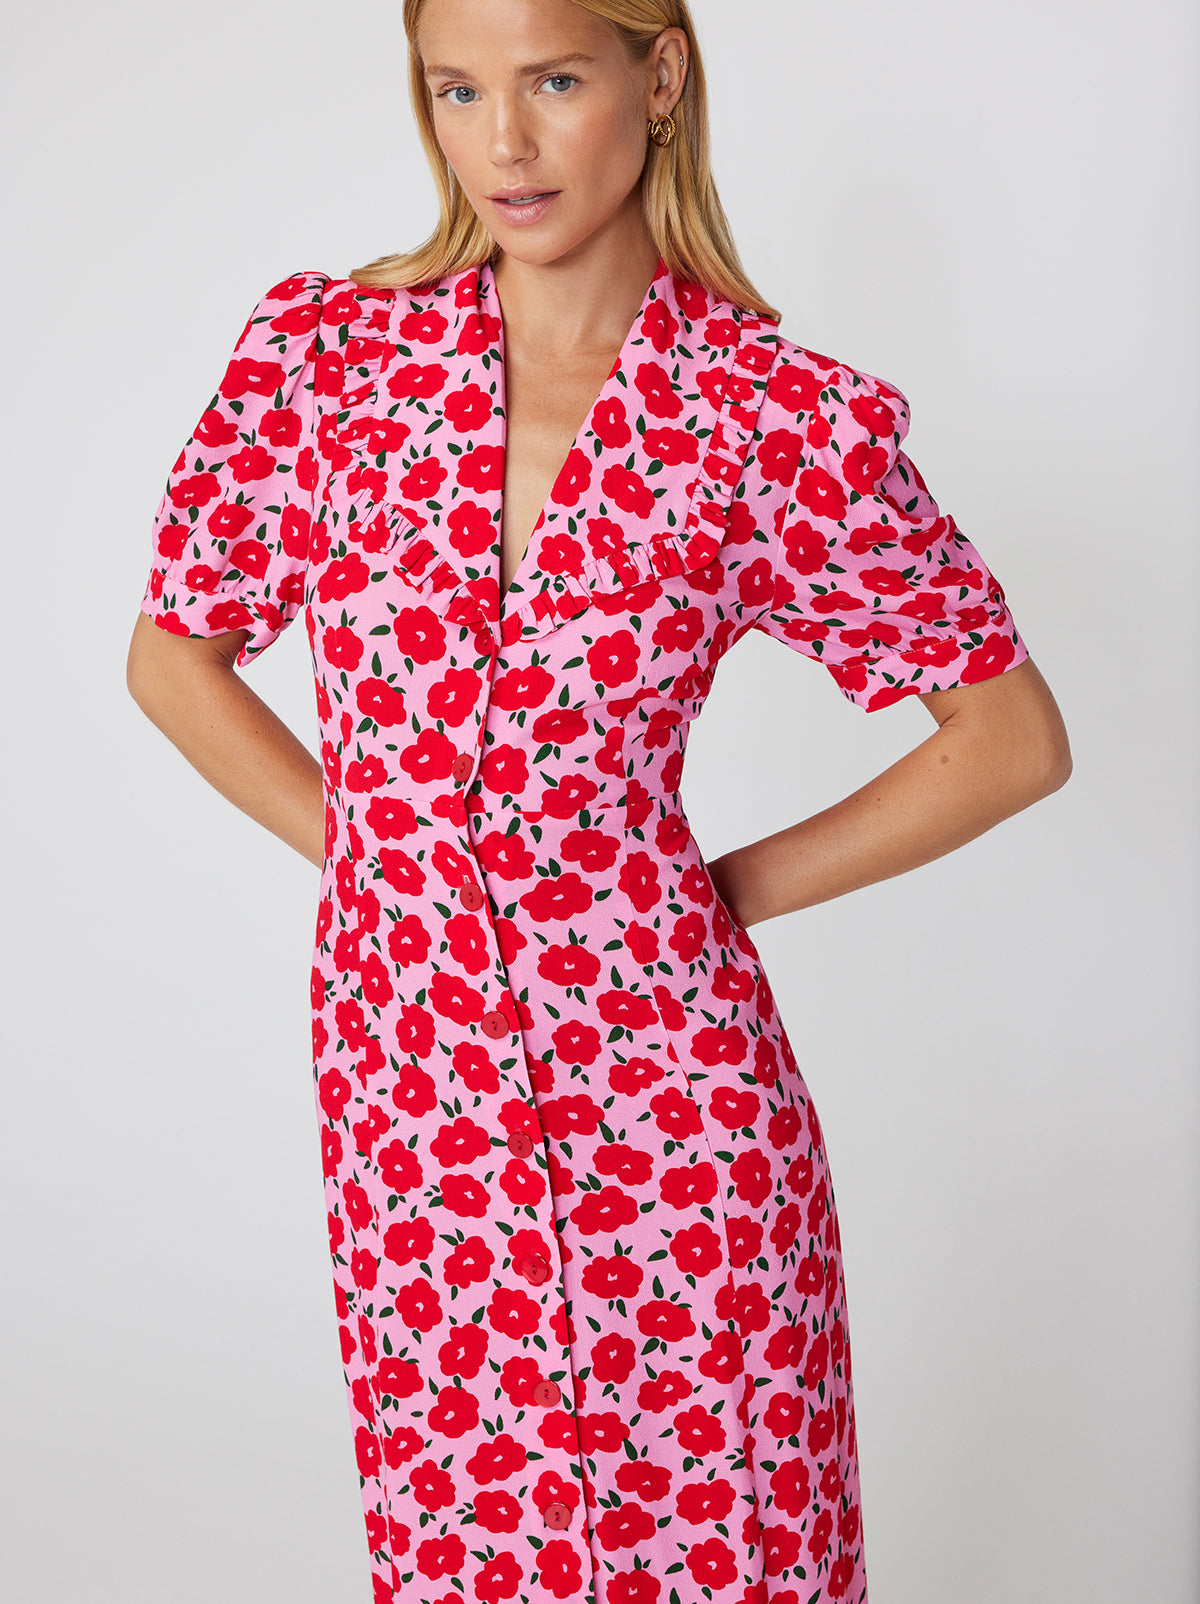 Bethany Pink Floral Tea Dress By KITRI Studio